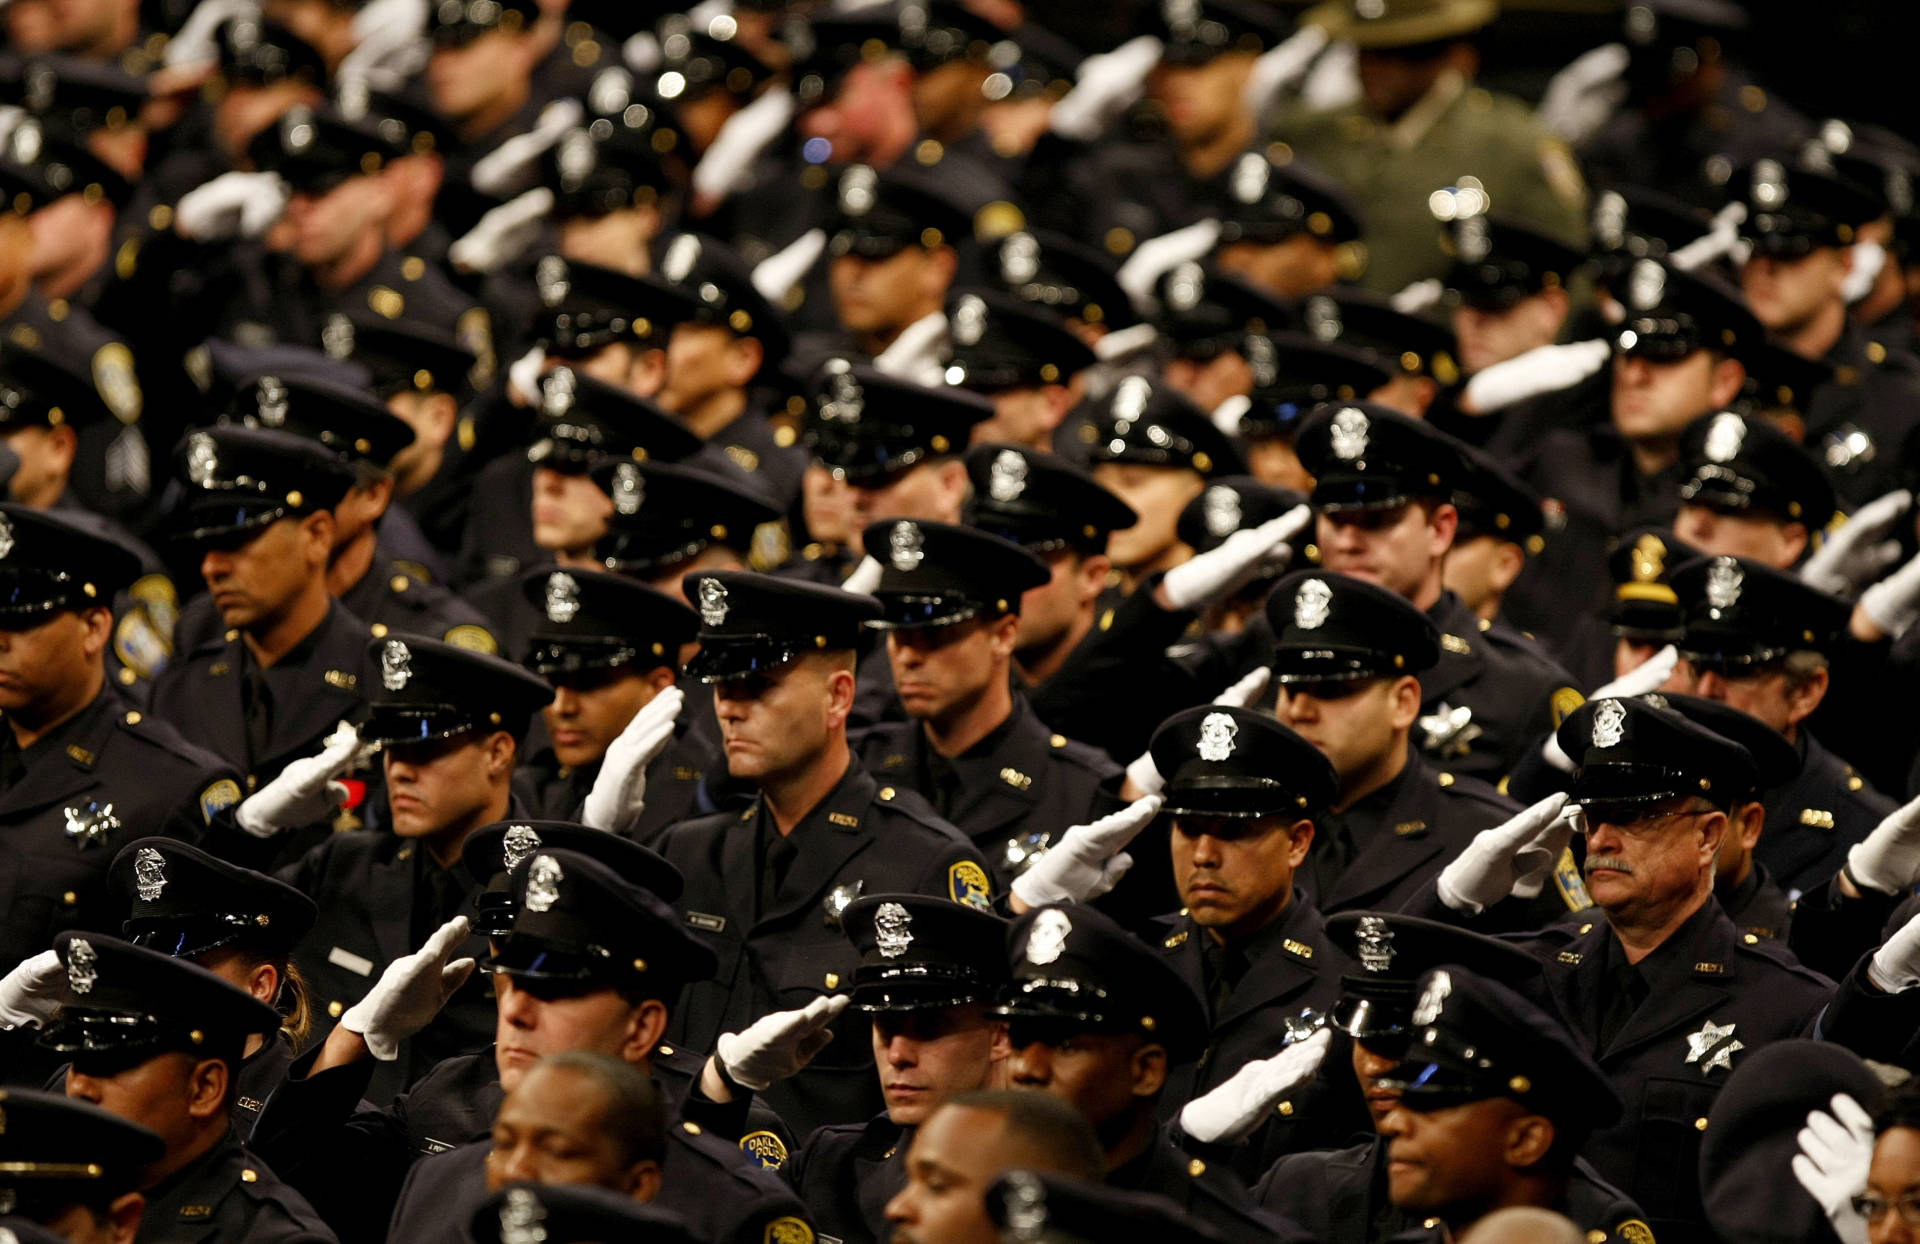  Members of the Oakland Police Department salute at the public memorial service for slain Oakland police officers Sgt. Mark Dunakin, 40; John Hege, 41; Sgt. Ervin Romans, 43; and Sgt. Daniel Sakai, 35, on March 27, 2009.  Michael Macor/Pool-Getty Images